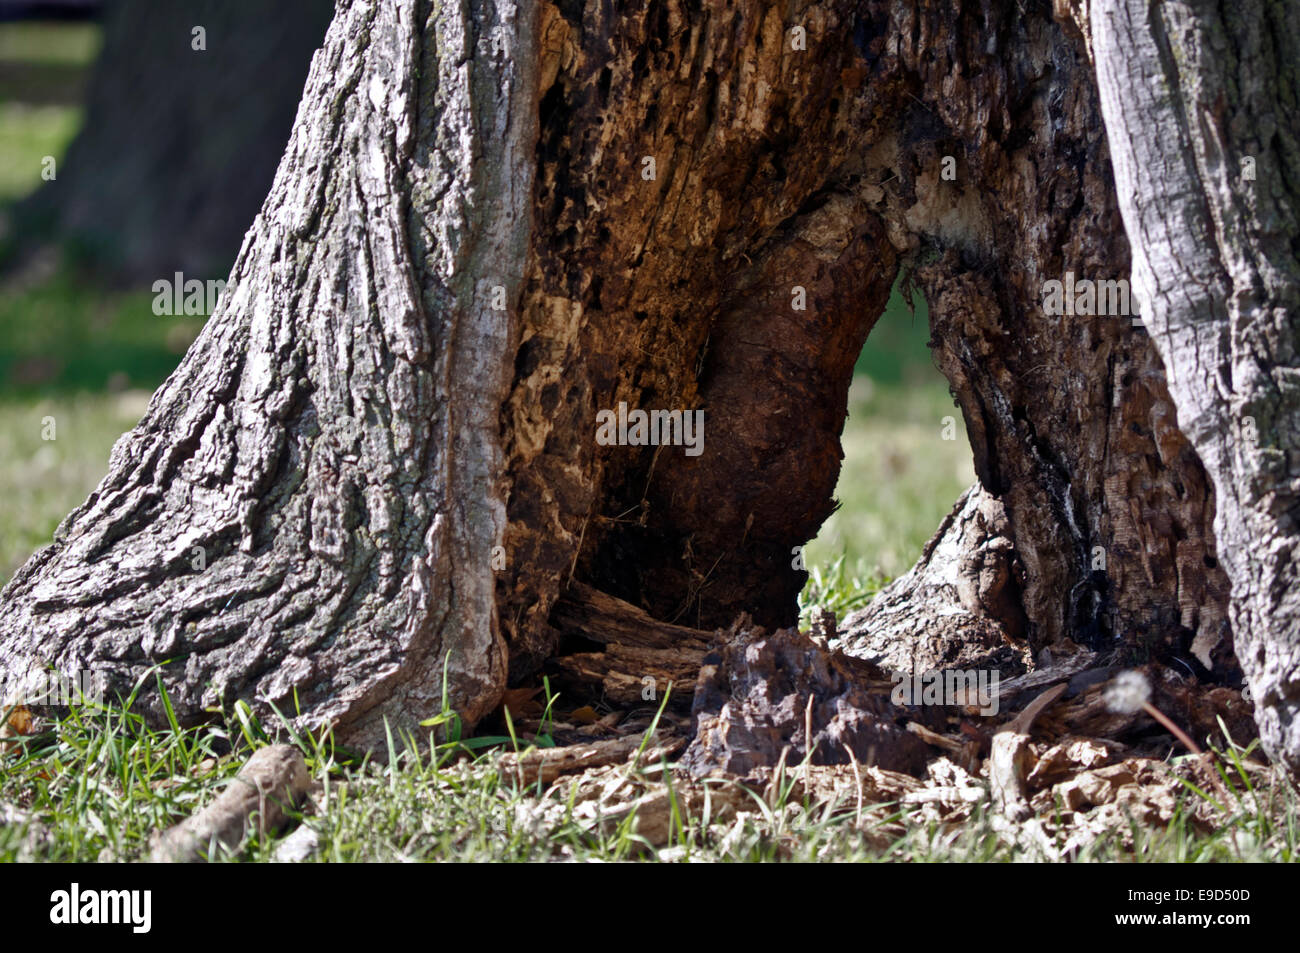 A hollowed tree trunk in a grassy field Stock Photo